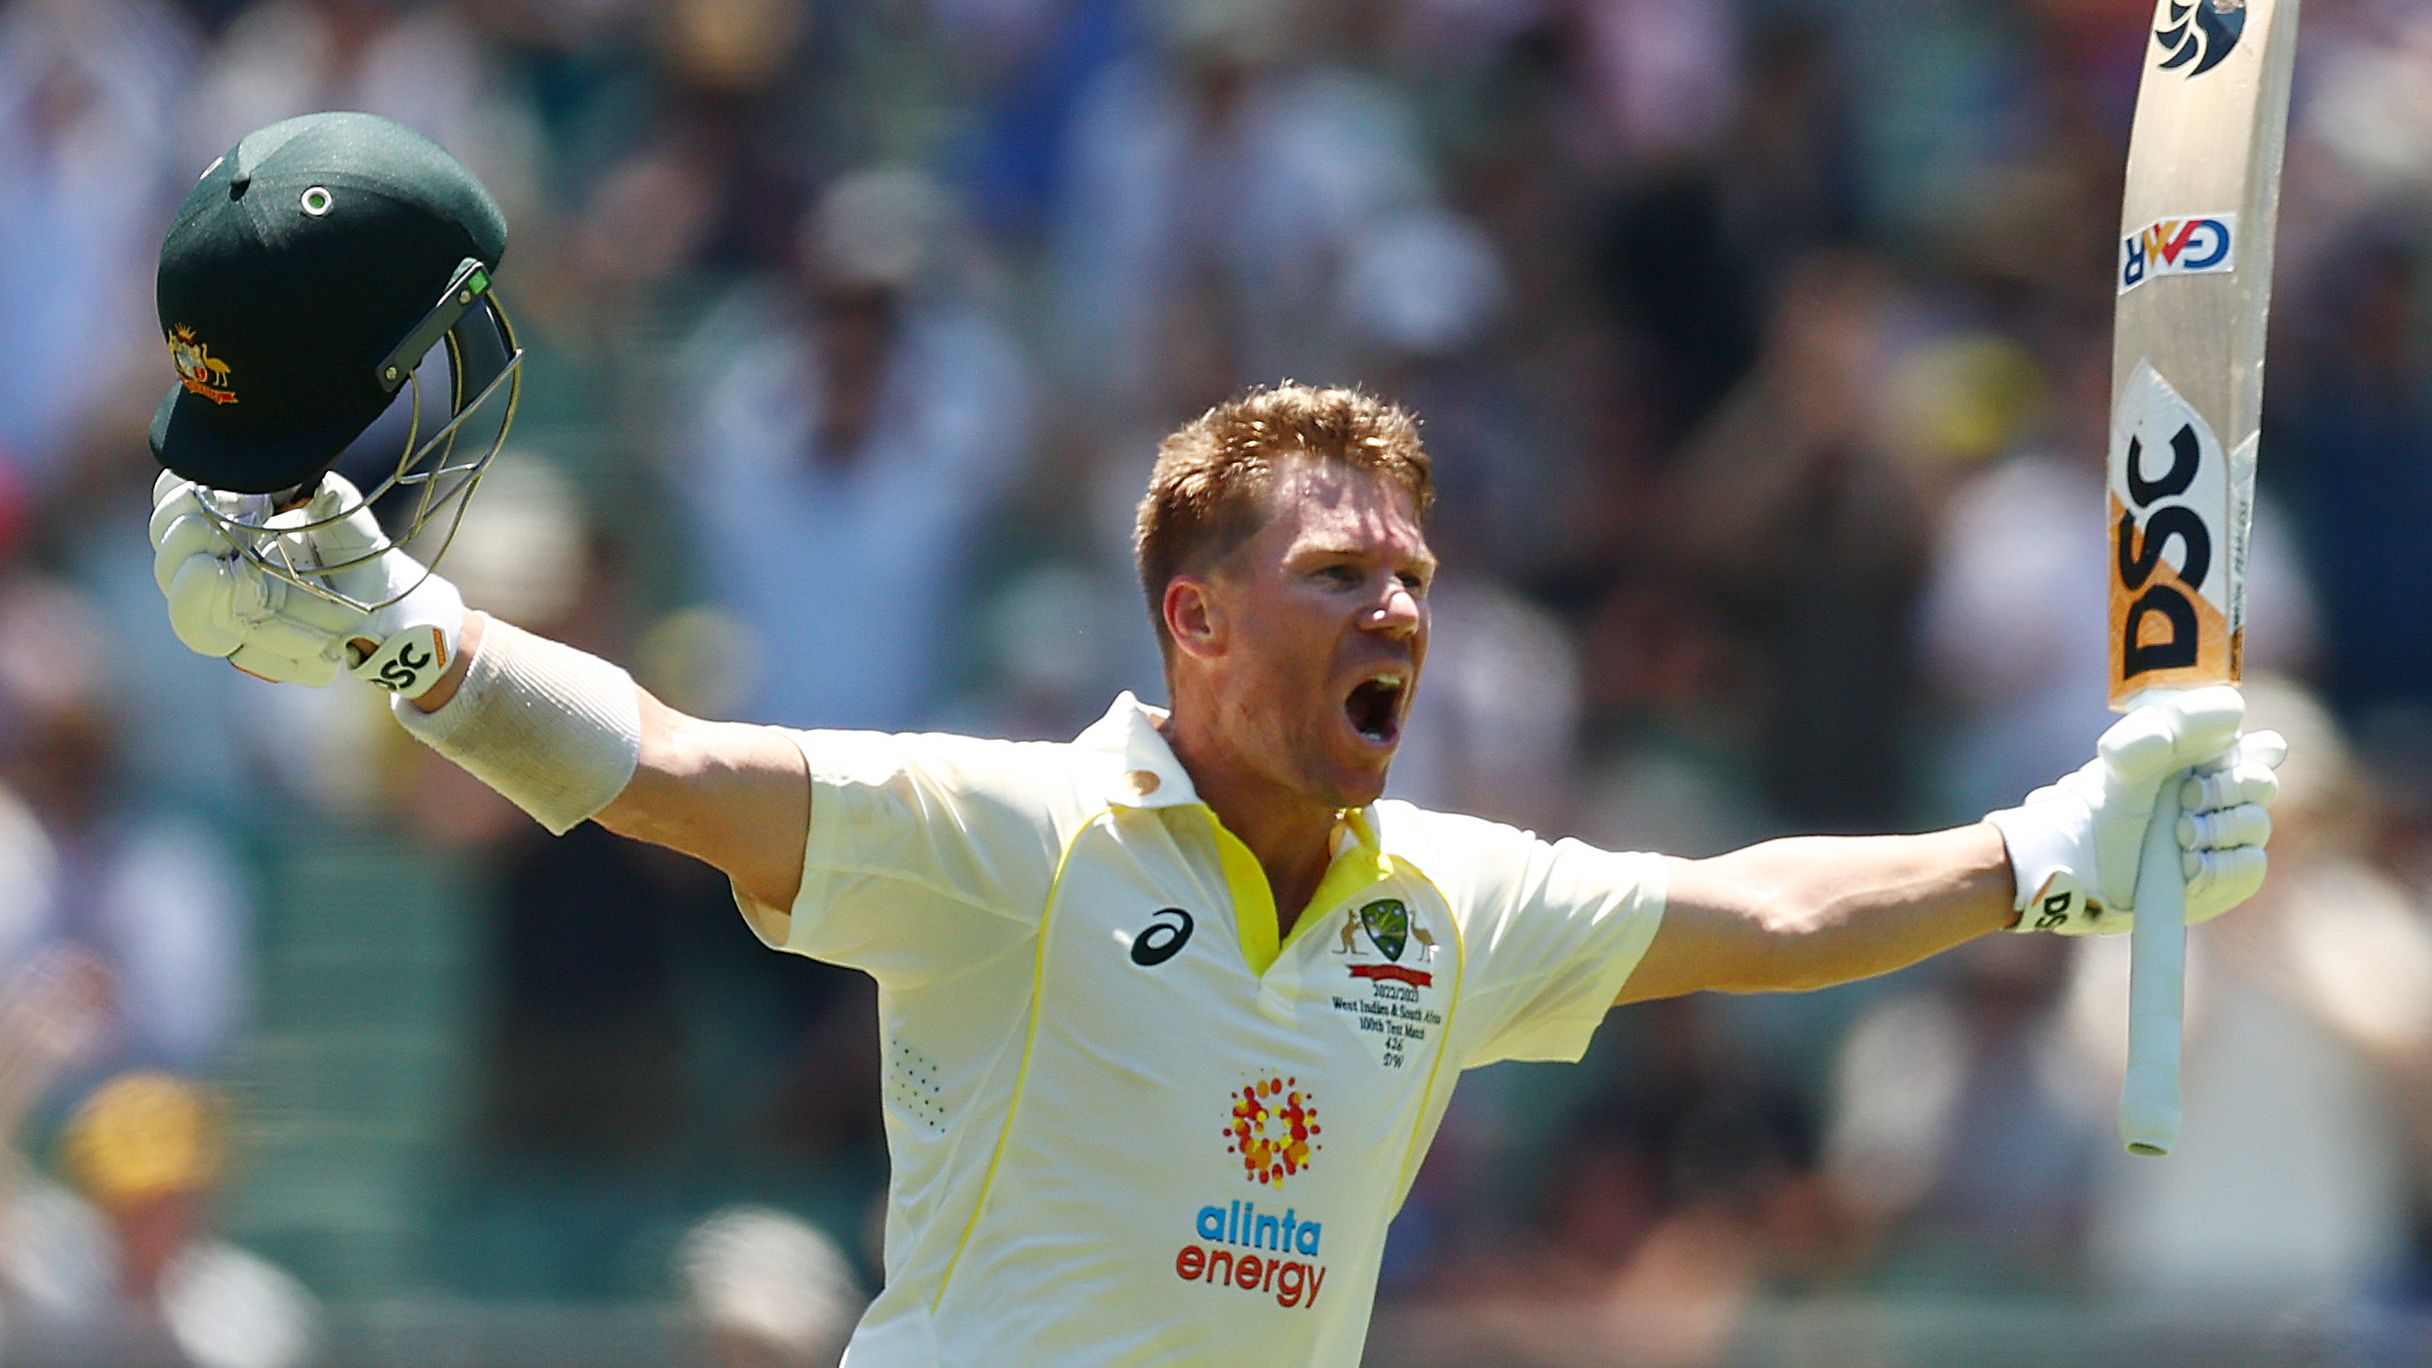 Home swansong the goal as David Warner announces plan for Test retirement